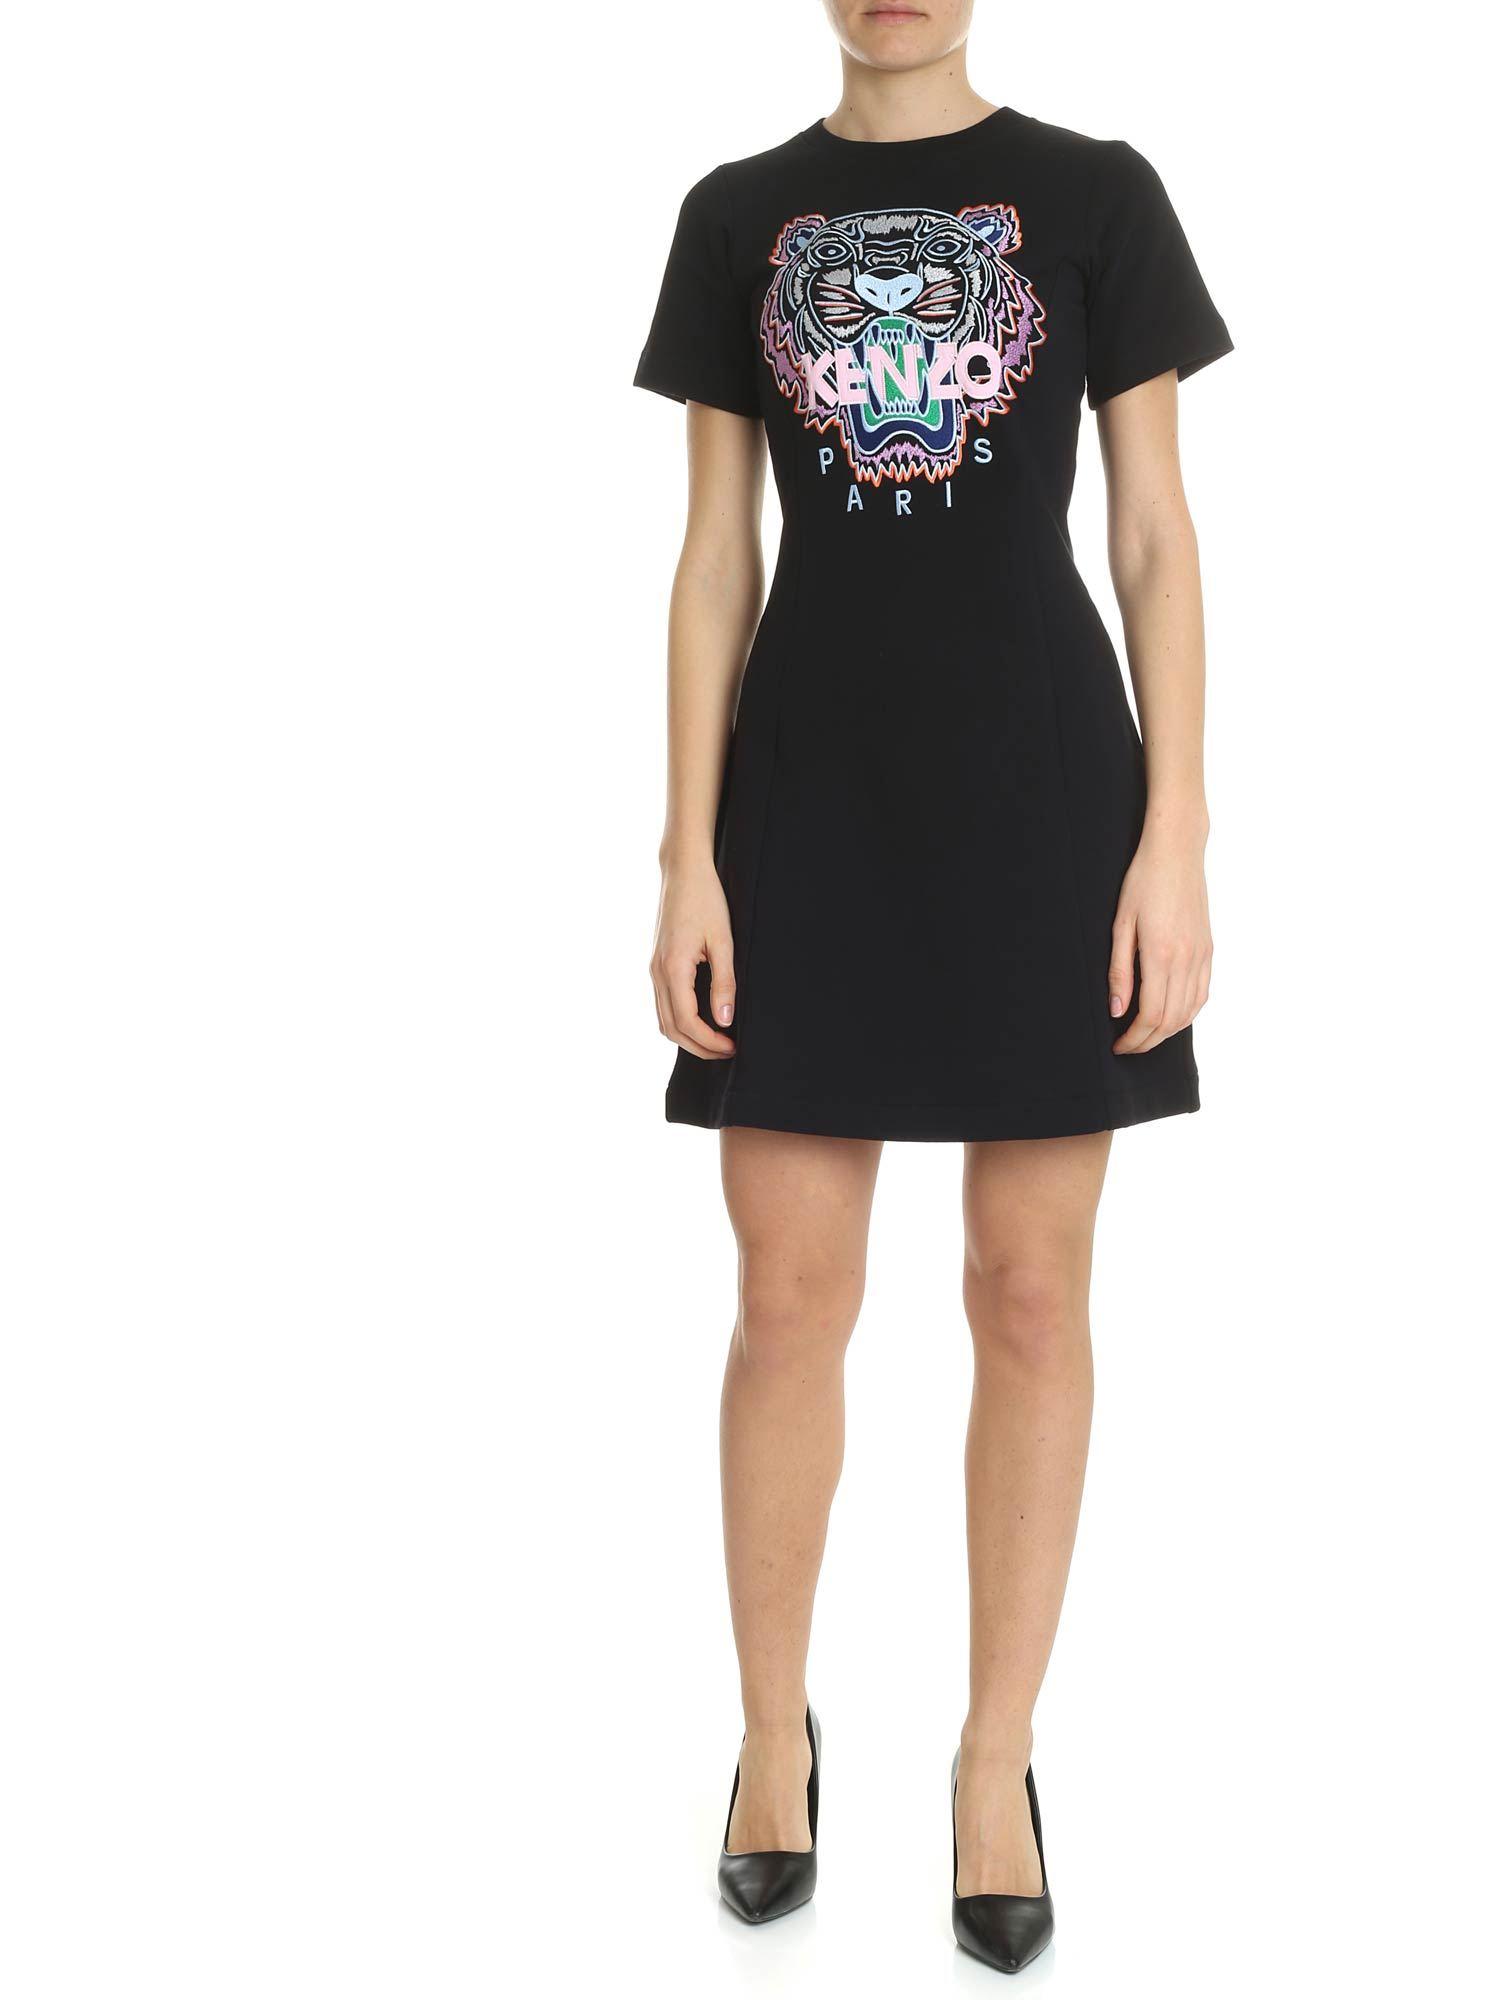 Lyst - KENZO Short Black Dress With Tiger Embroidery in Black